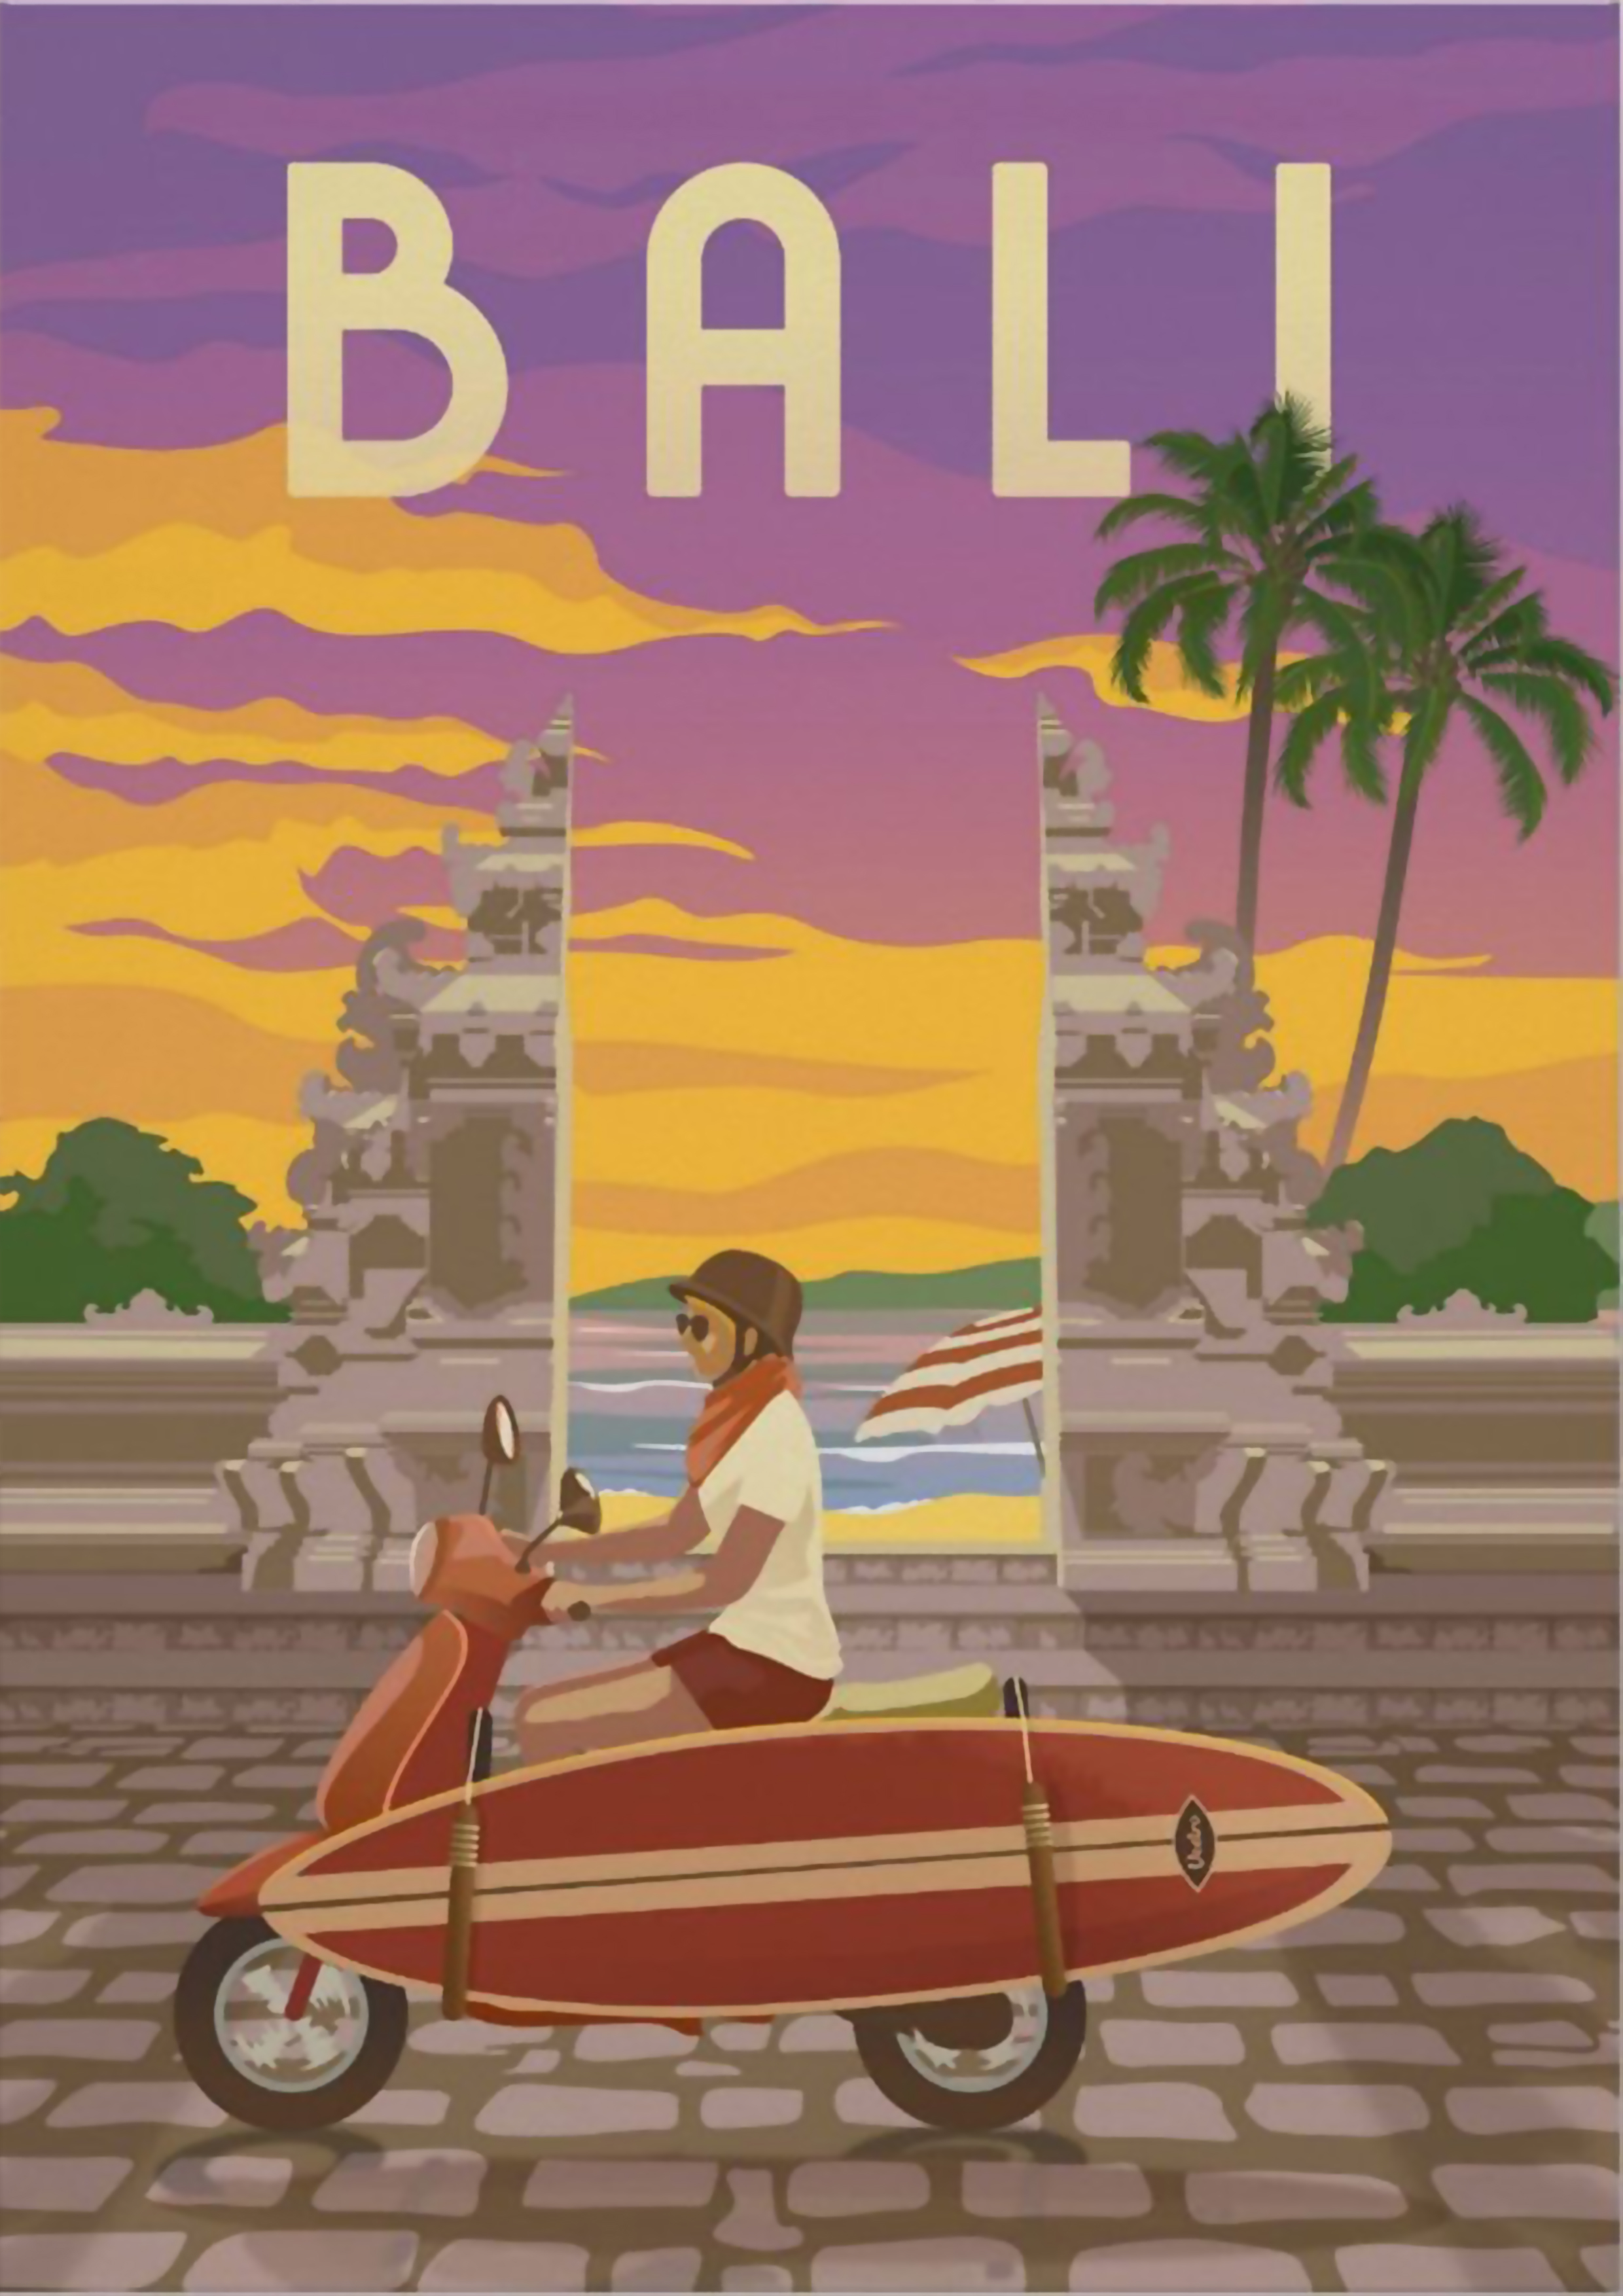 Bali, Indonesia Travel Poster